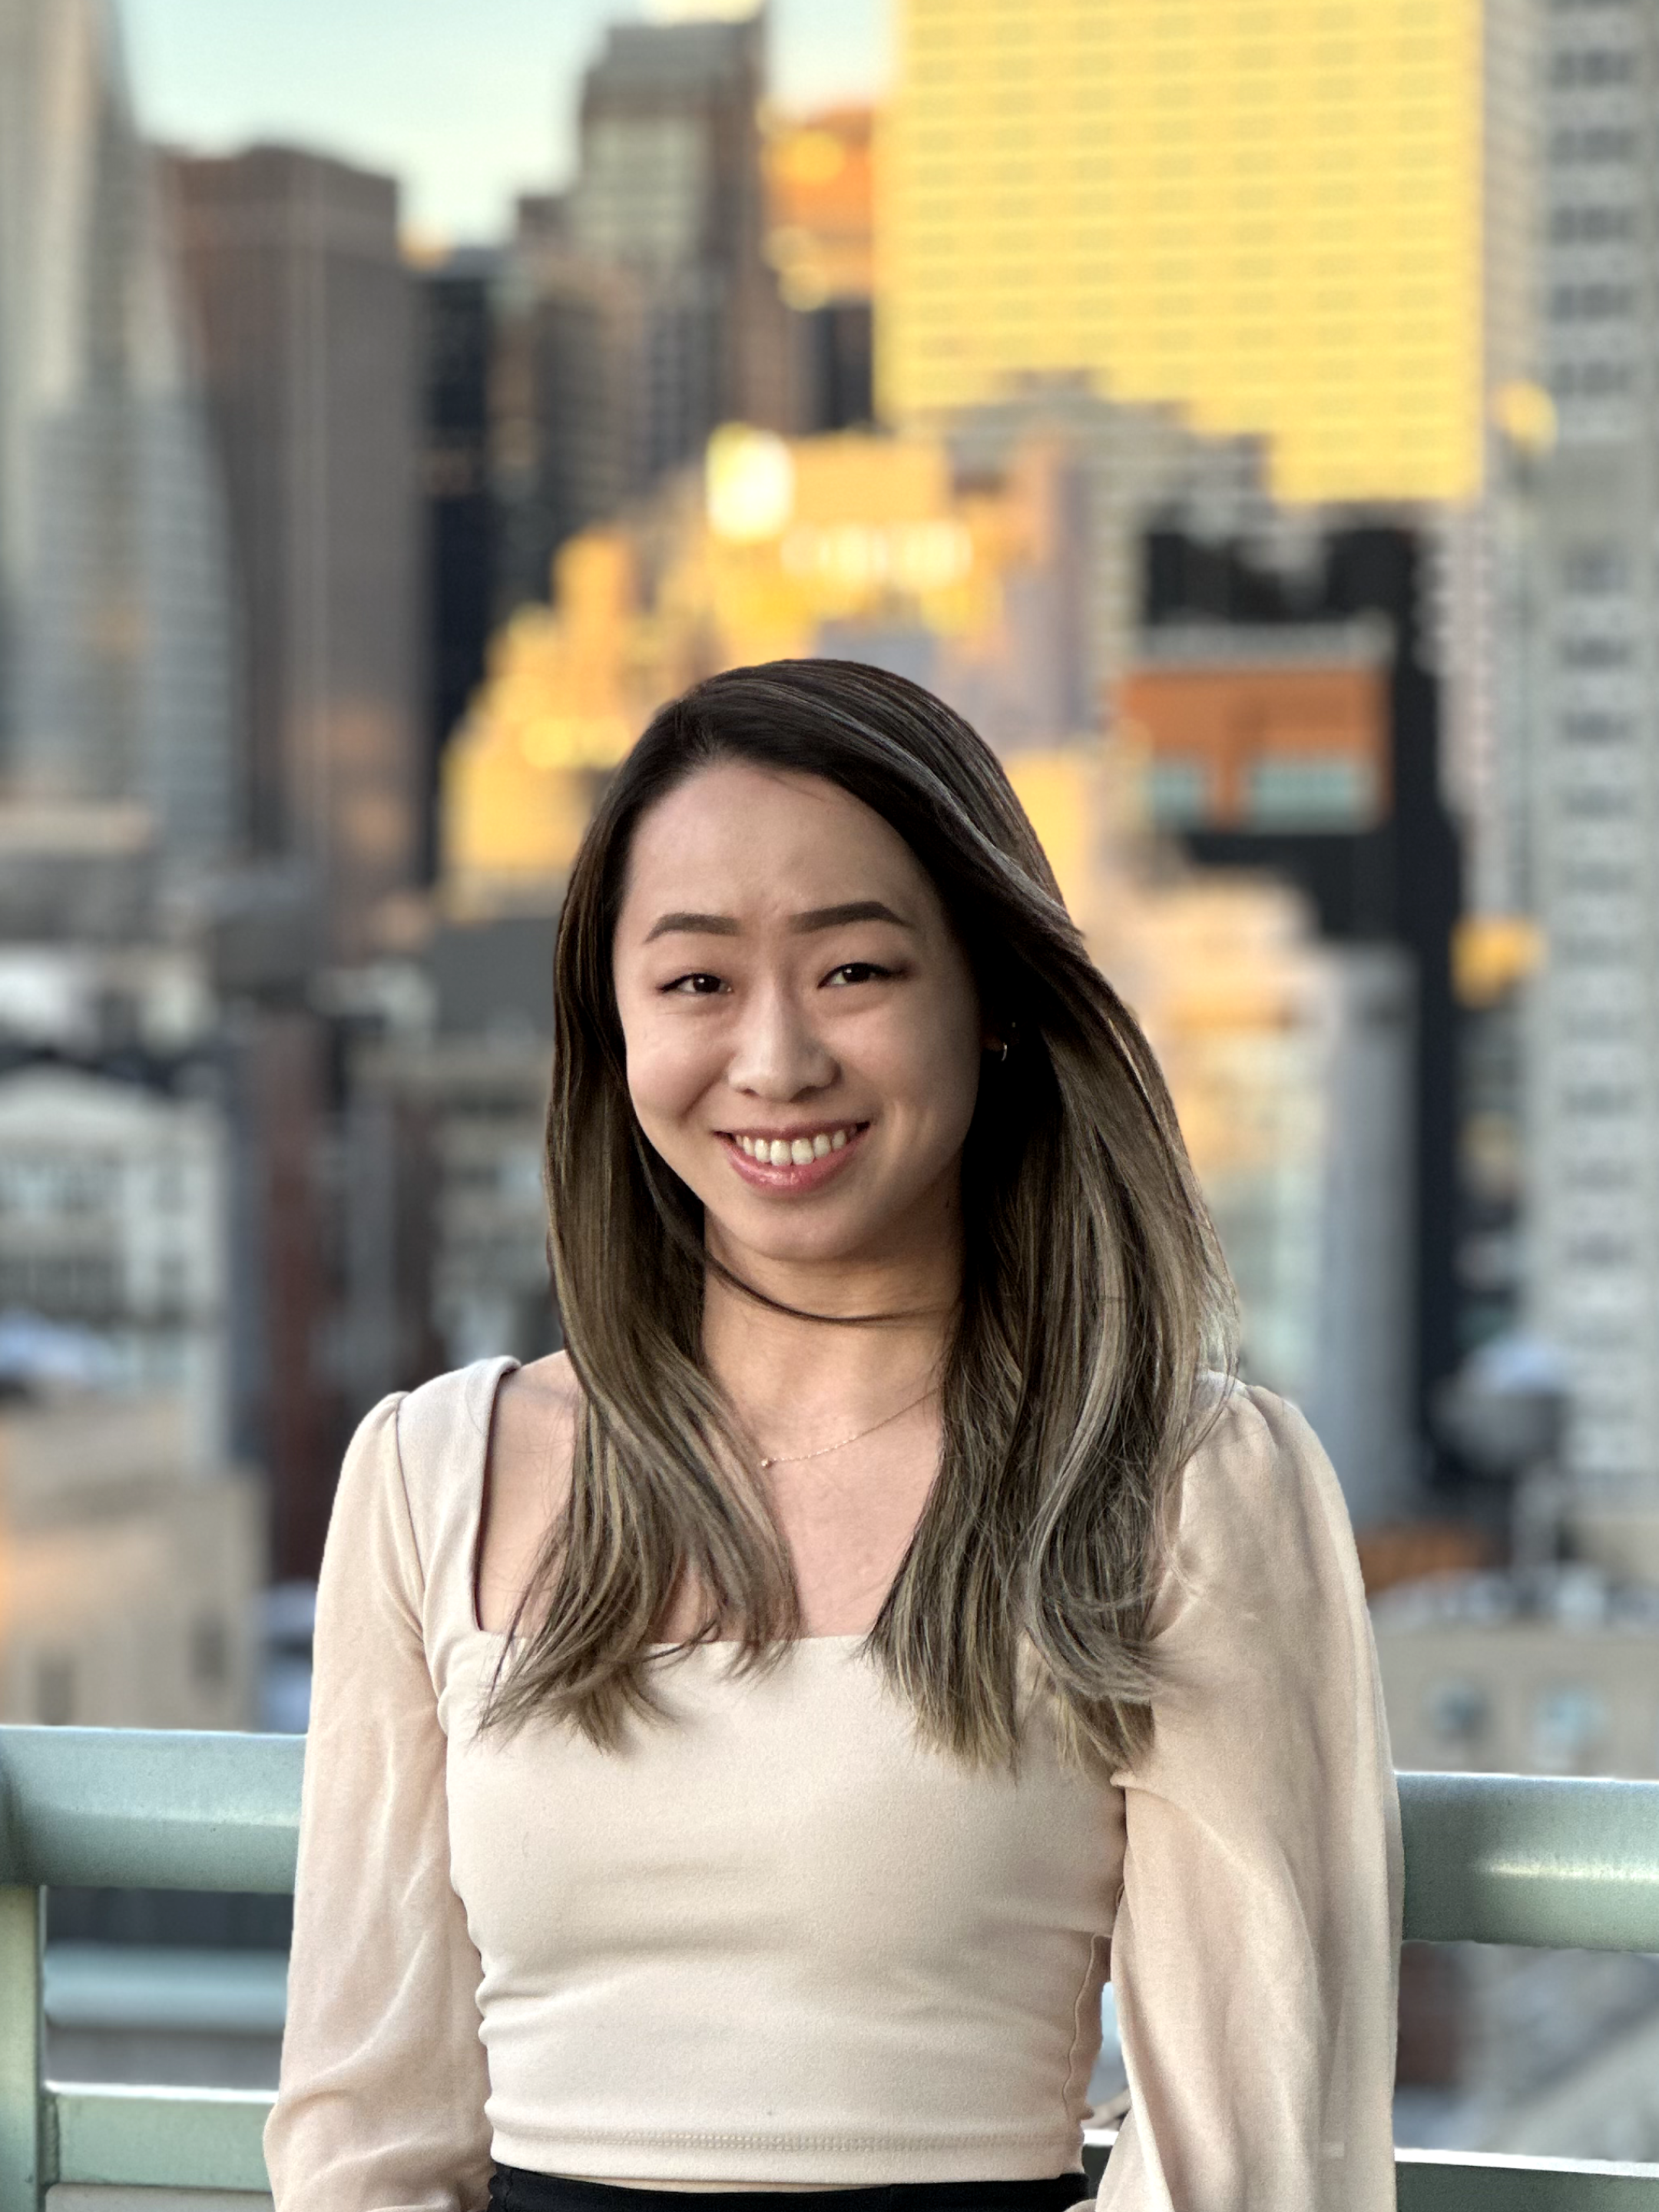 Tiffany was born on the East Coast (in Maryland!) but moved to the Bay Area within the first 2 years of her life, where she grew up and now calls home. In her free time, she enjoys exploring new restaurants and powerlifting.